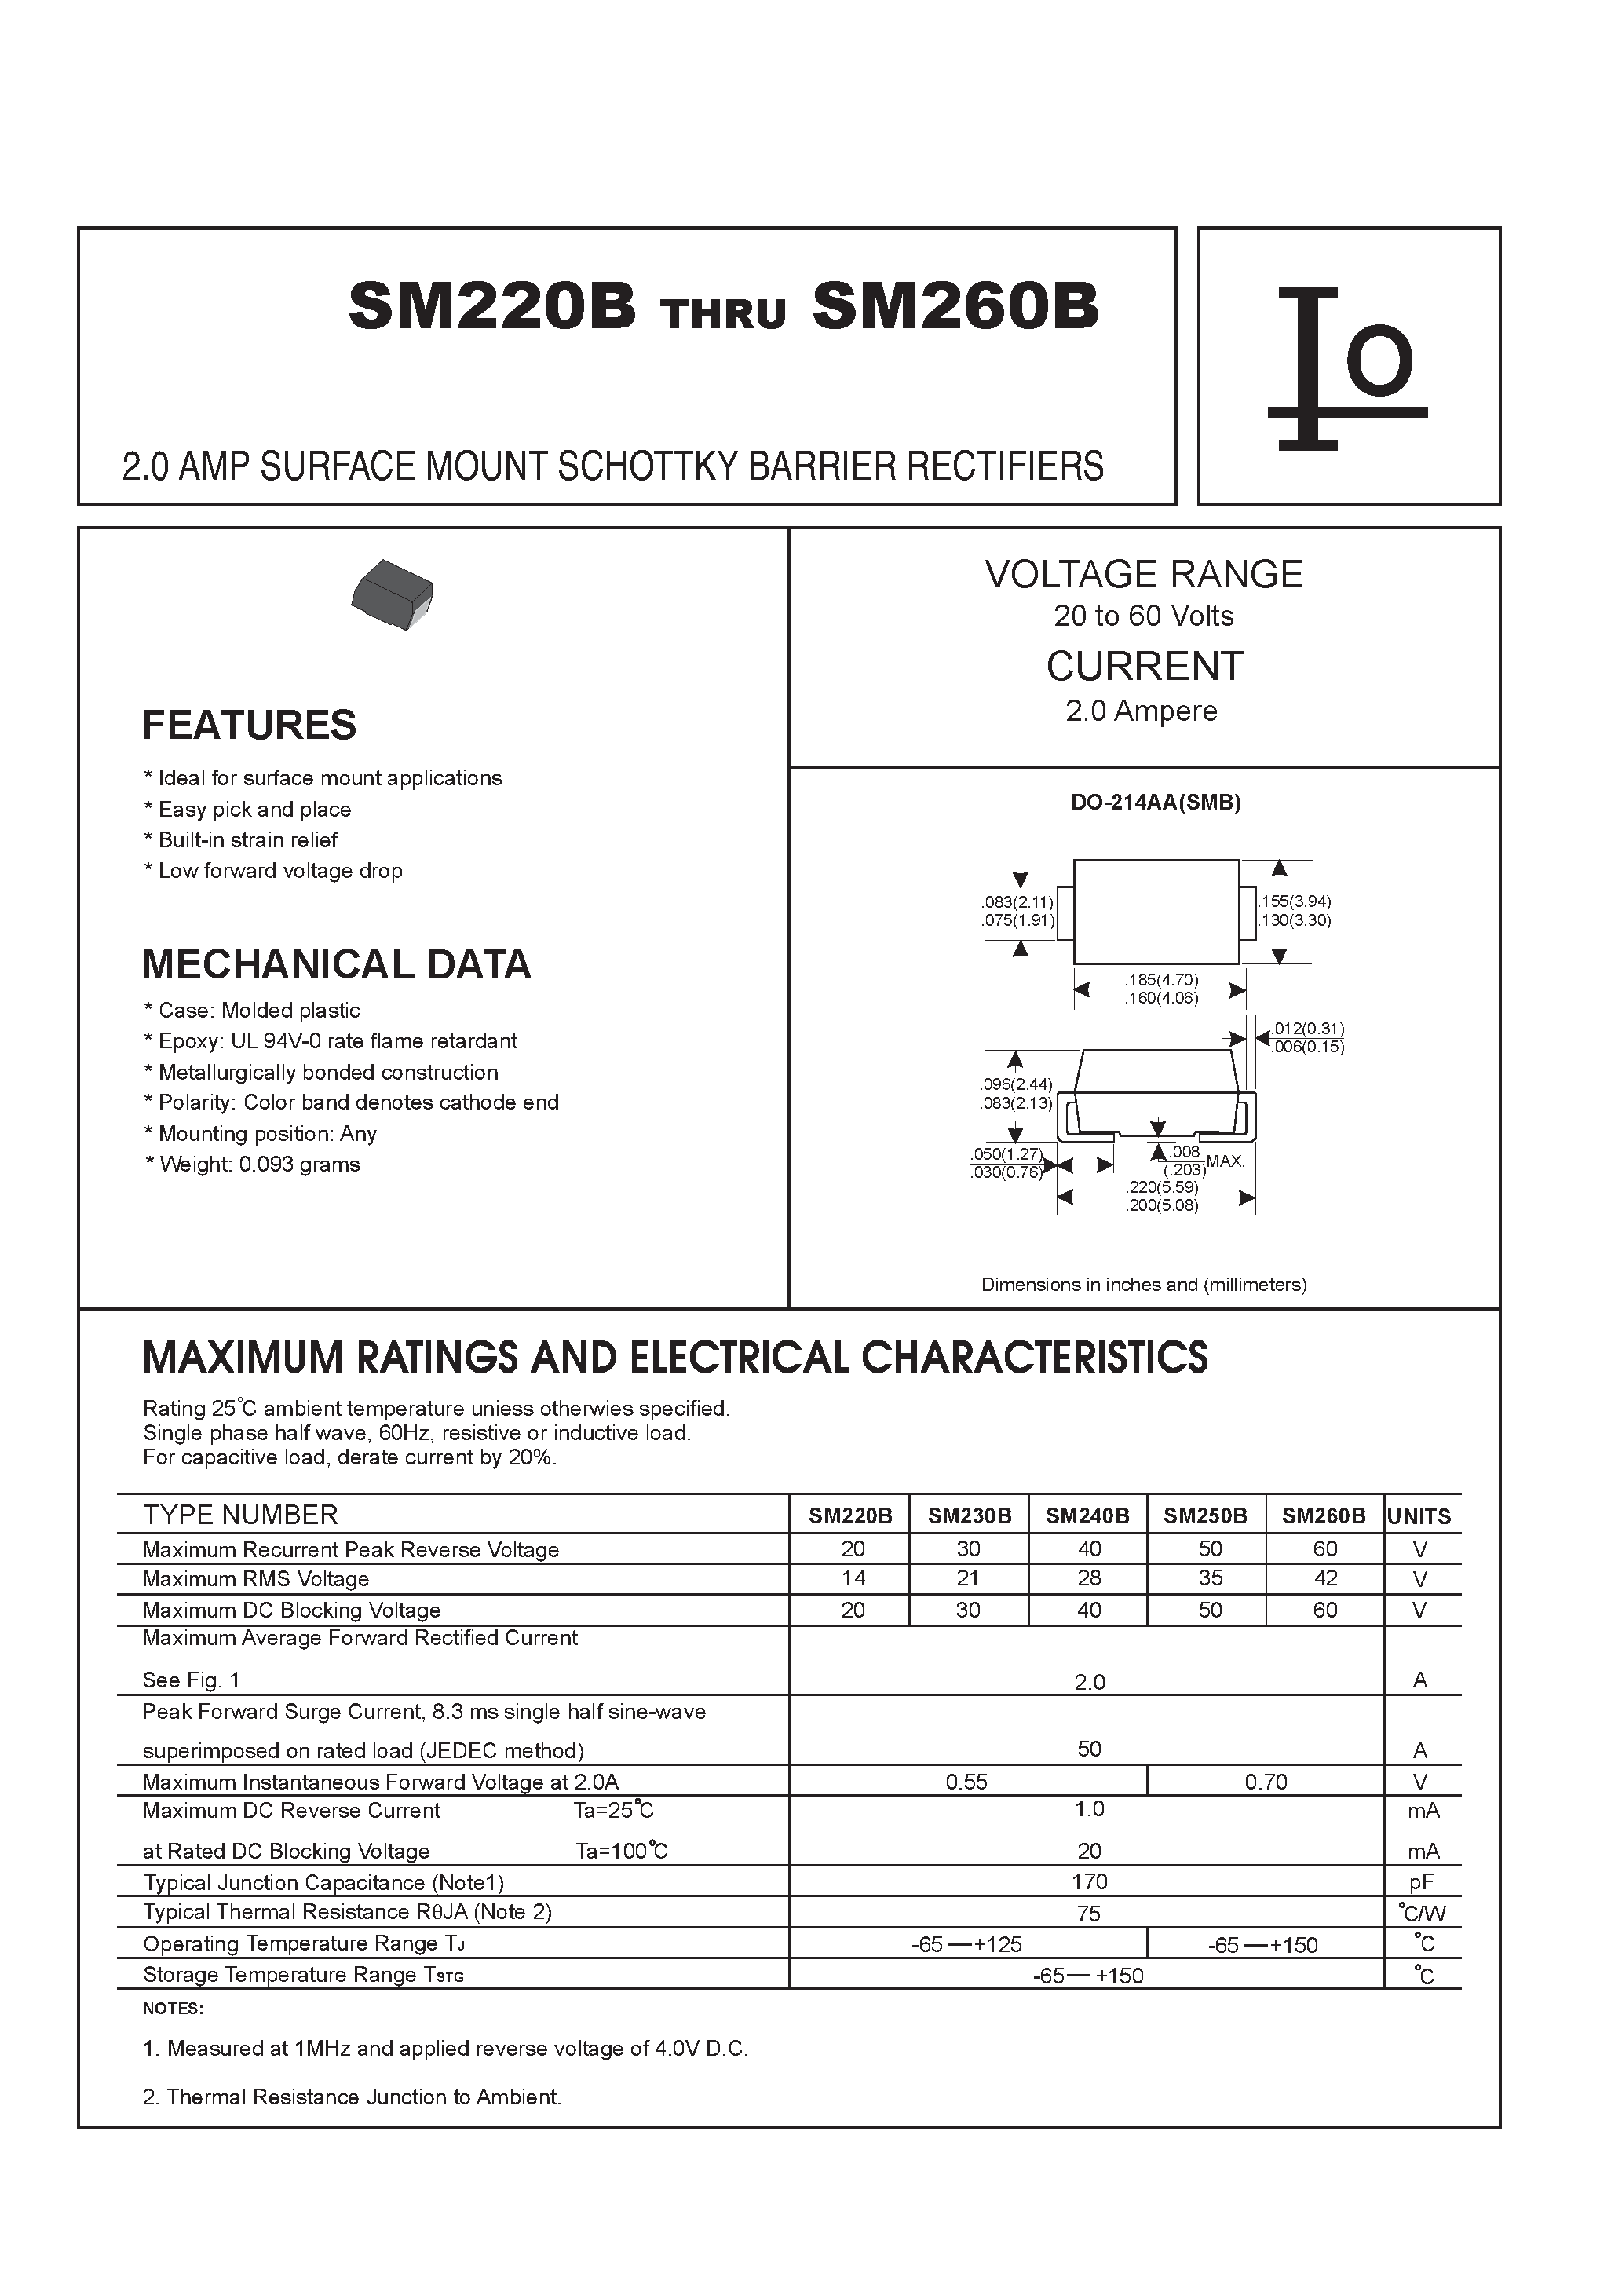 Datasheet SM220B - 2.0 AMP SURFACE MOUNT SCHOTTKY BARRIER RECTIFIERS page 1